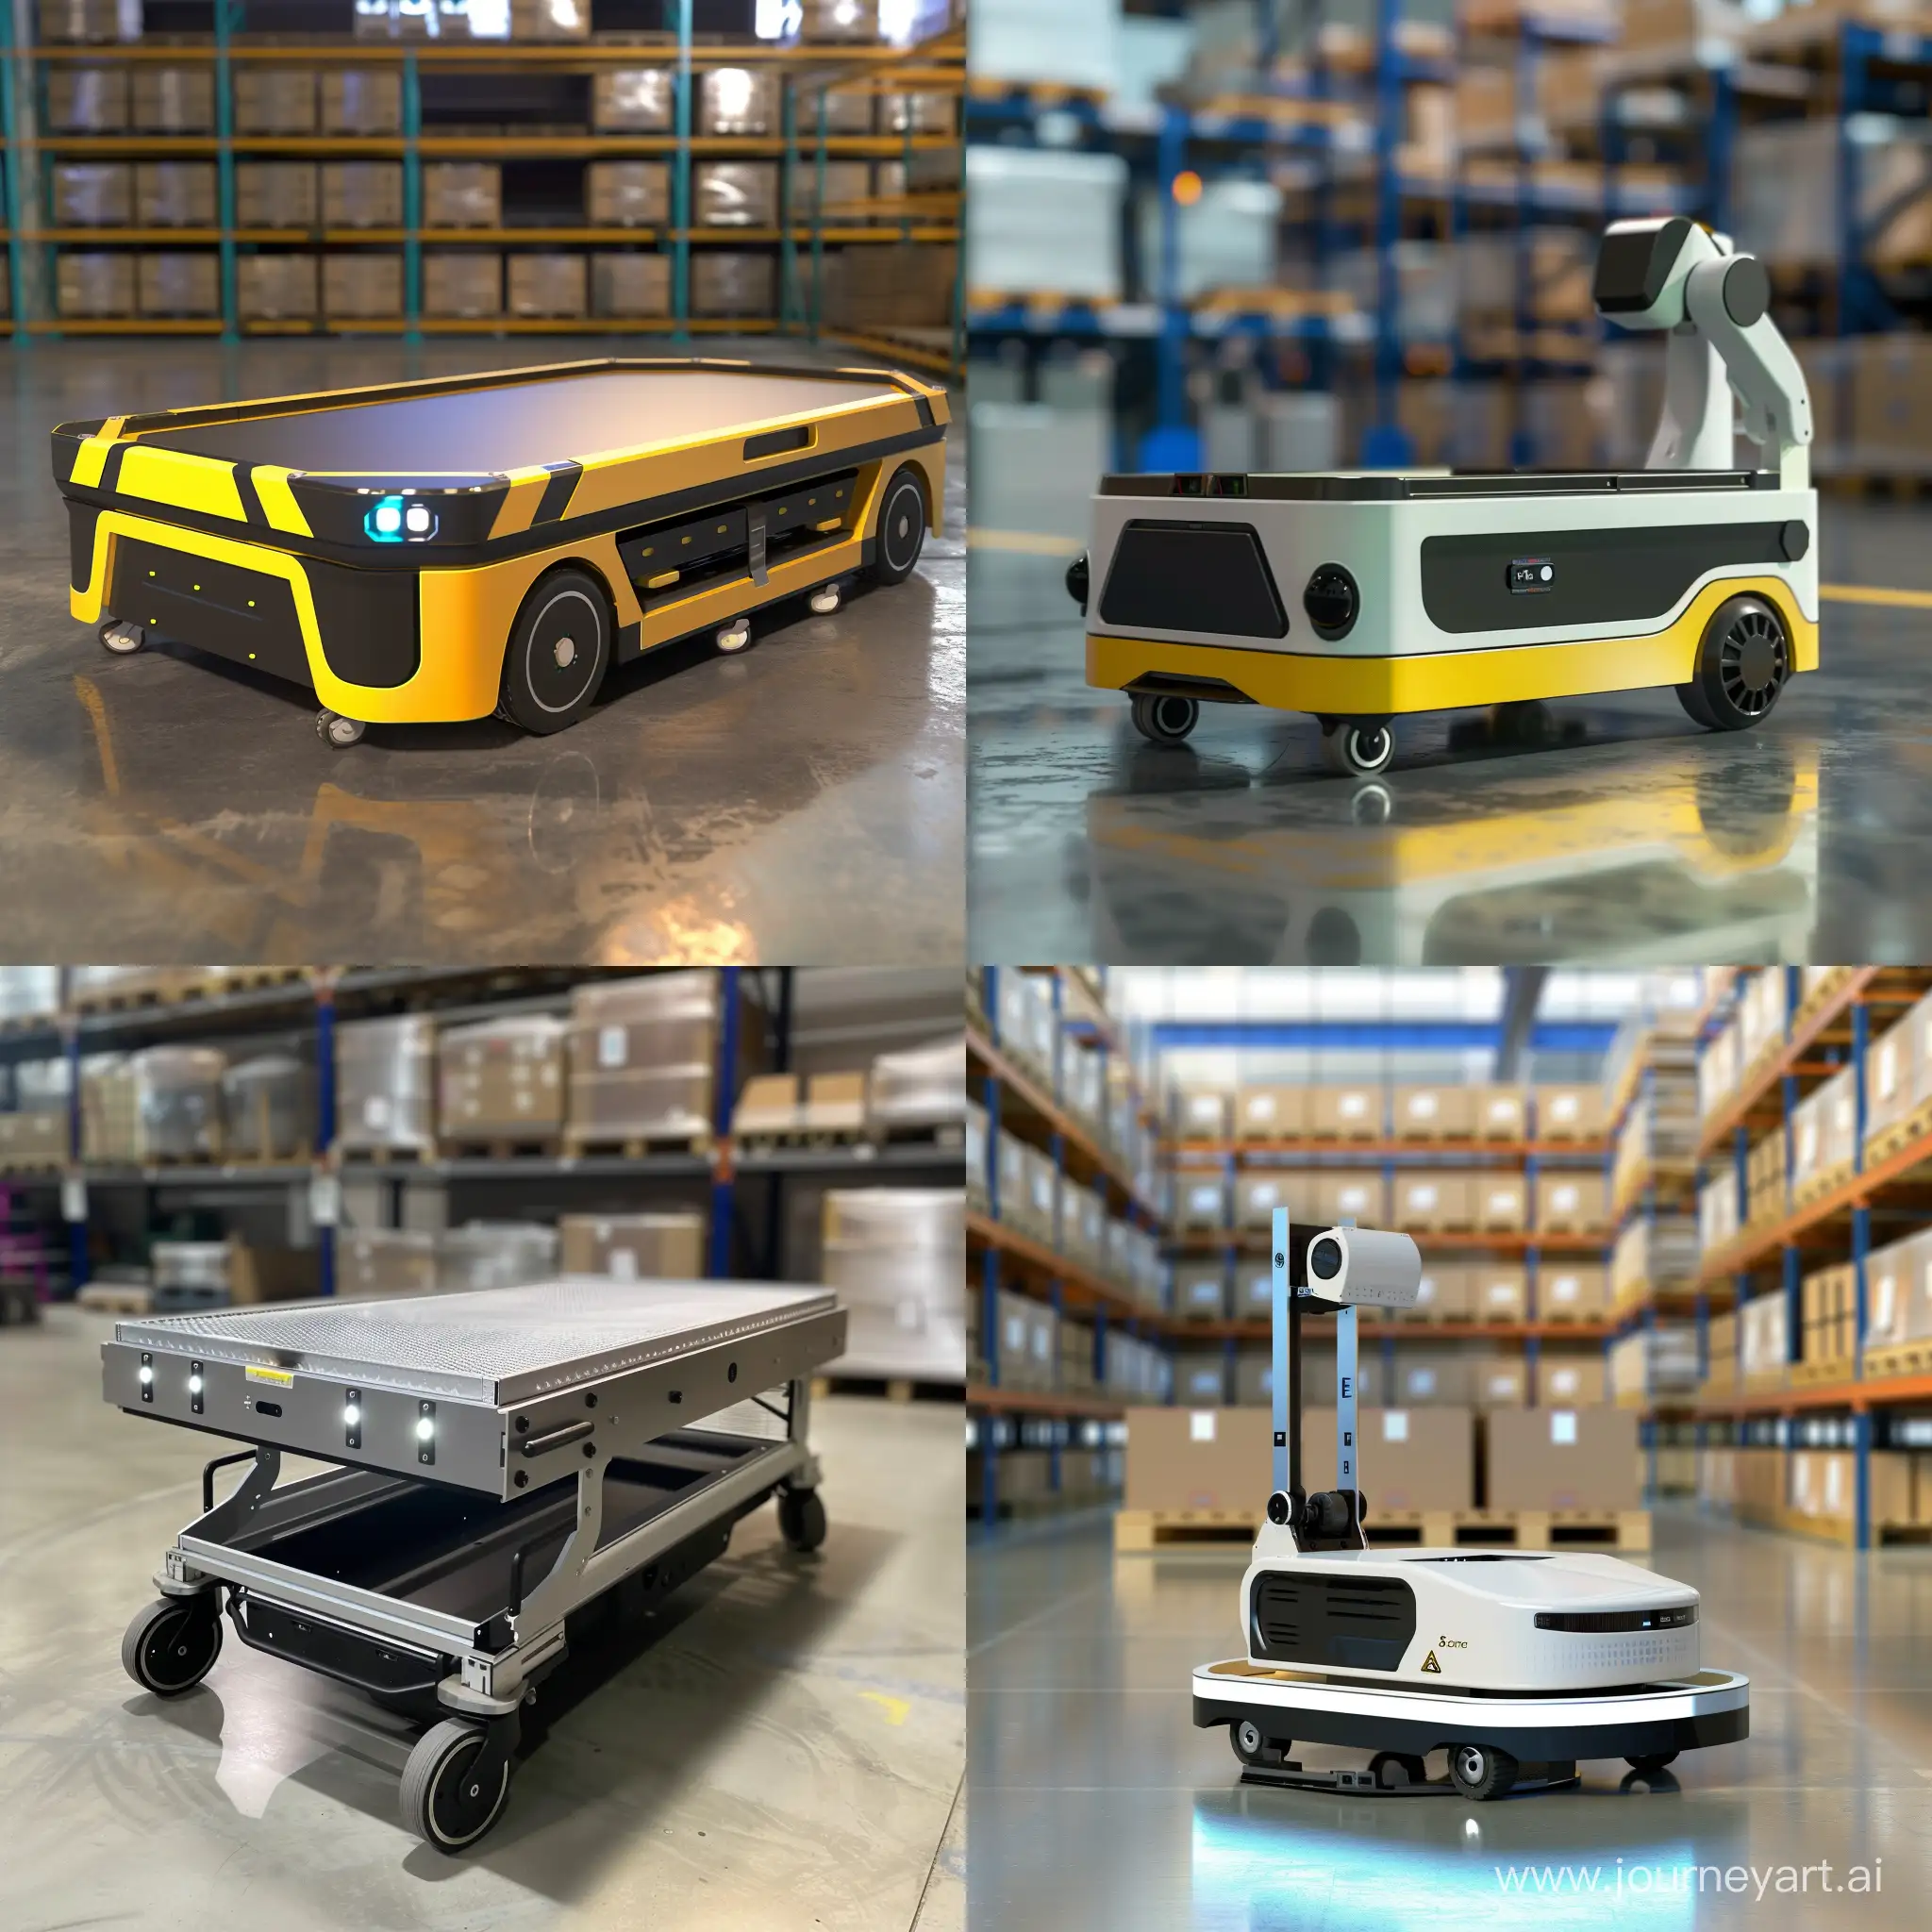 Autonomous-Robot-Cart-in-Unloaded-State-for-Loading-Warehouse